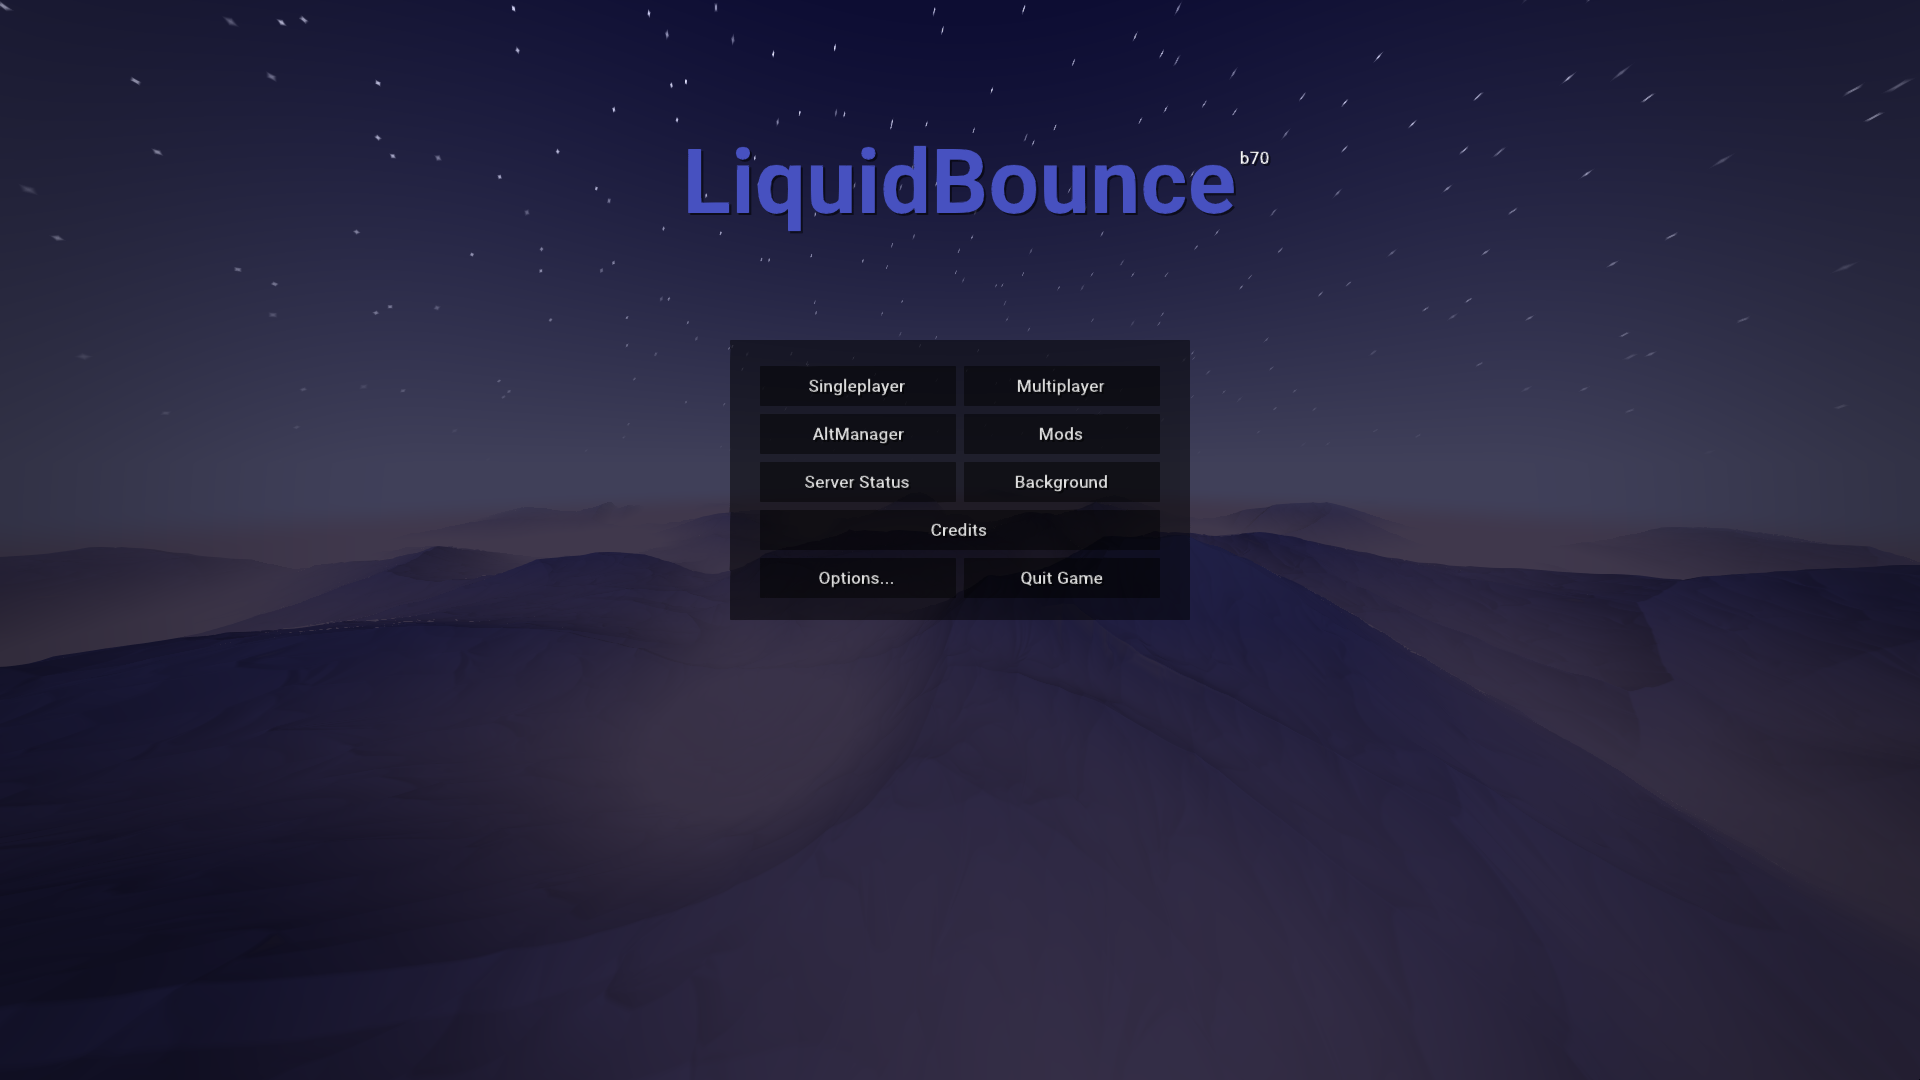 liquidbounce recommended specs